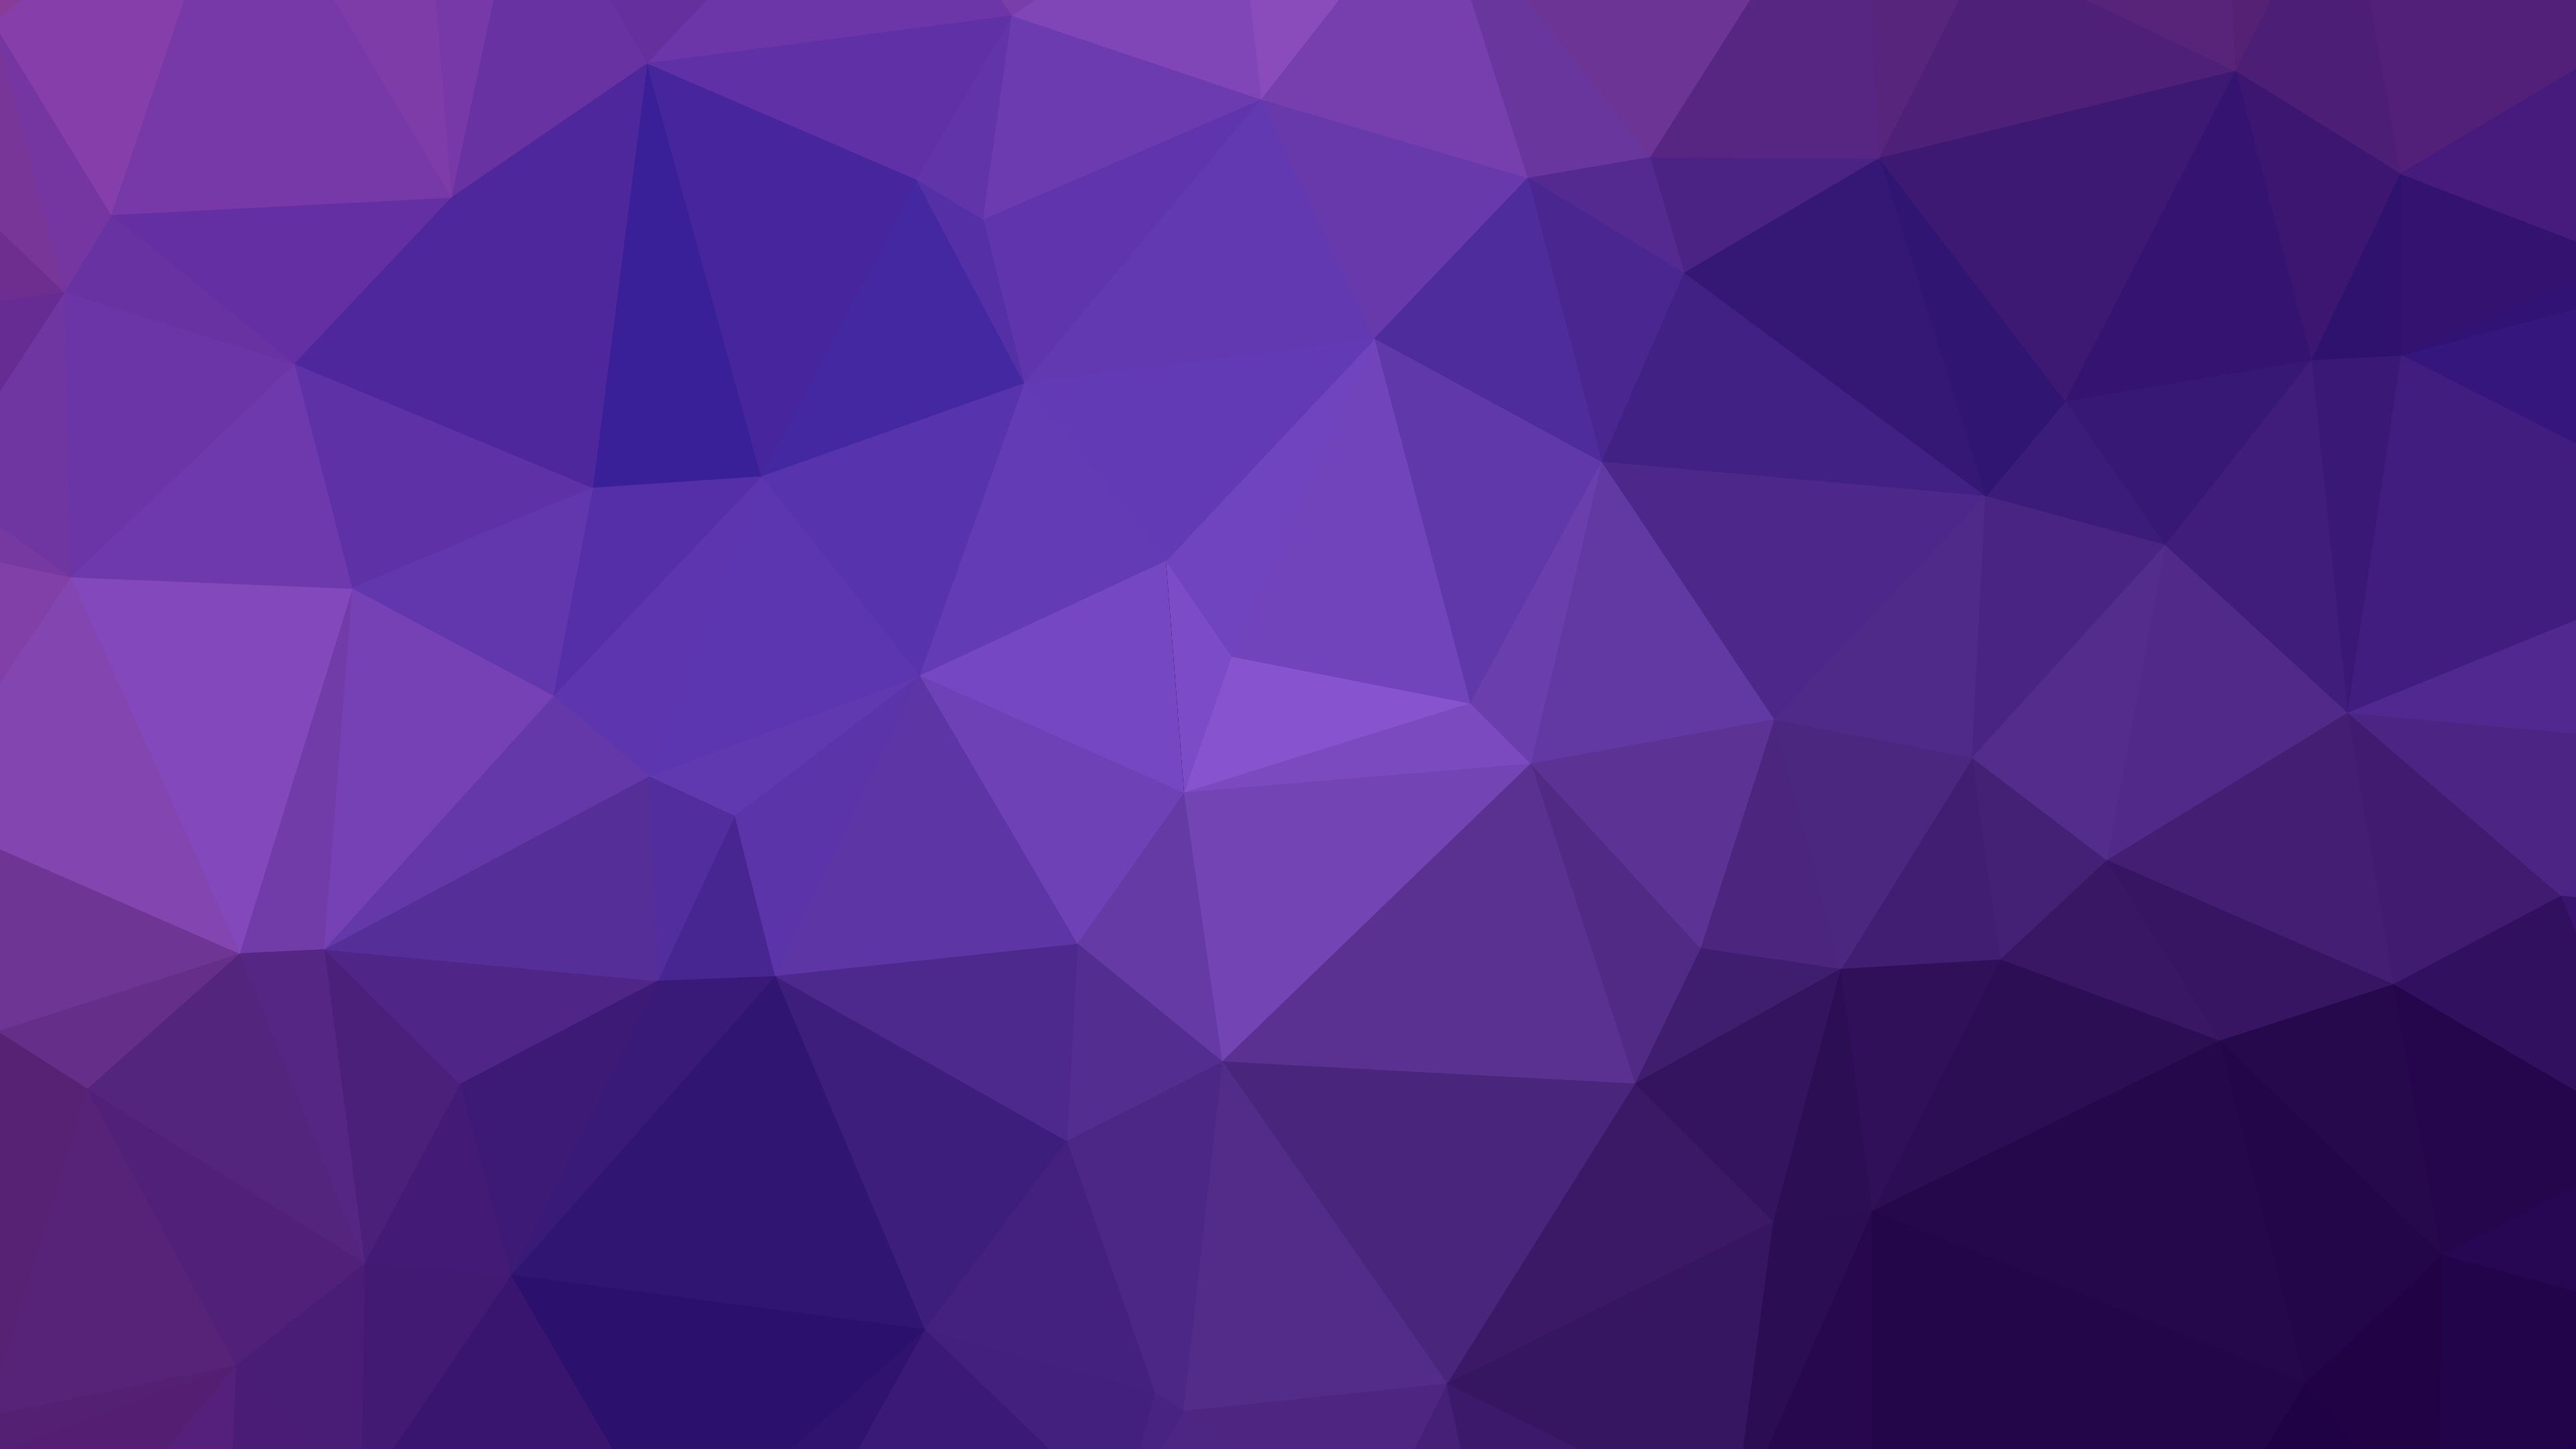 Download 3840x2160 wallpaper geometry, triangles, gradient, purple, abstract, 4k, uhd 16: widescreen, 3840x2160 HD image, background, 6211